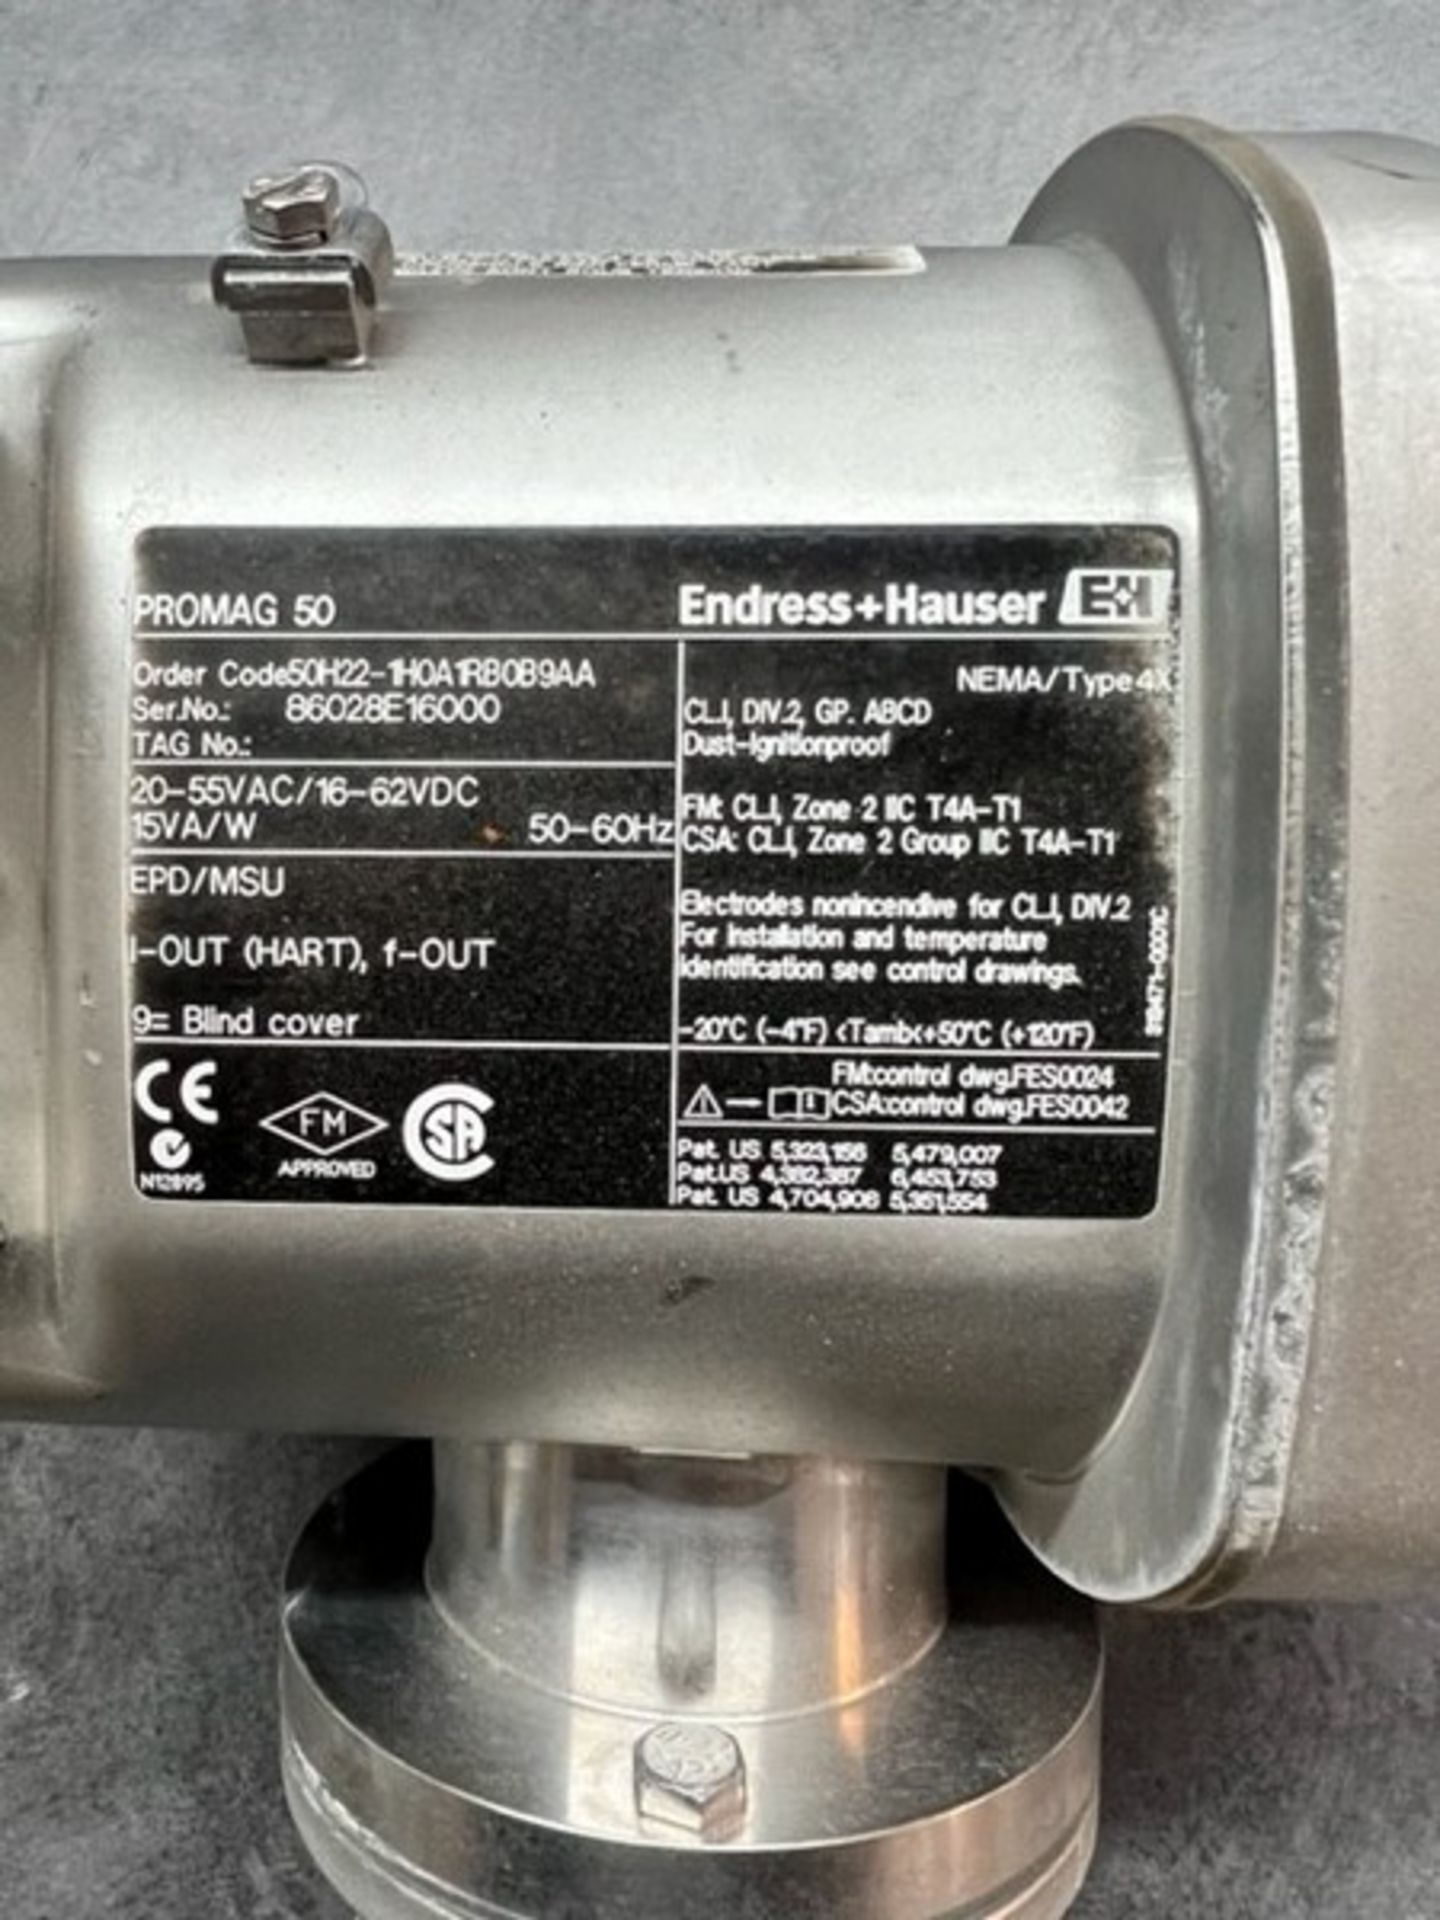 Endress Hauser 1" ProMag 50, S/N 86028E16000 (Load Fee $50) (Located Harrodsburg, KY) - Image 5 of 6